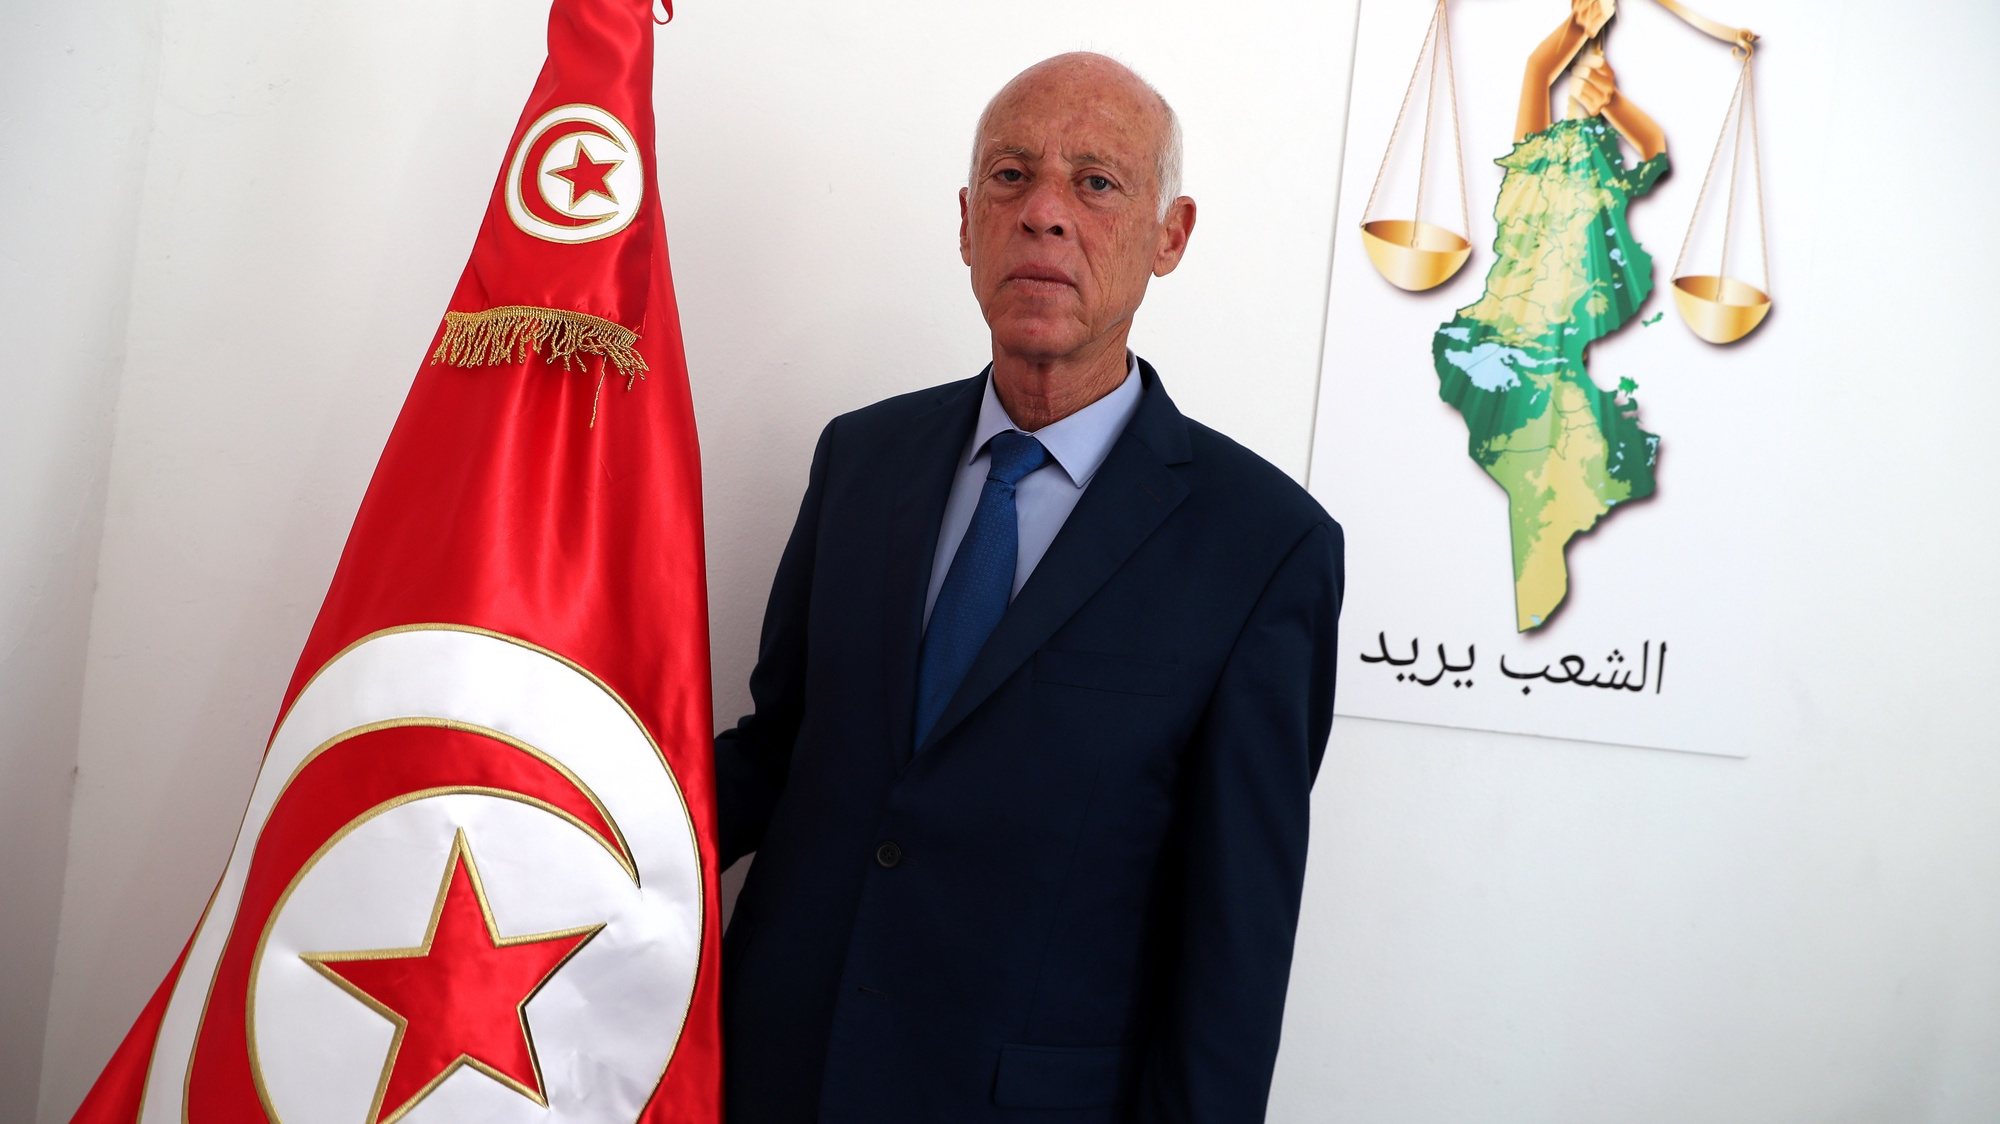 epa07846948 Tunisian presidential candidate Kais Saied poses for a photo at his campaign headquarters in Tunis, Tunisia, 16 September 2019. According to reports, preliminary results showed presidential candidates Kais Said, a 61-year-old law professor, and imprisoned businessman Nabil Karoui are leading the first round of voting and expected to face off in the second round in October.  EPA/MOHAMED MESSARA